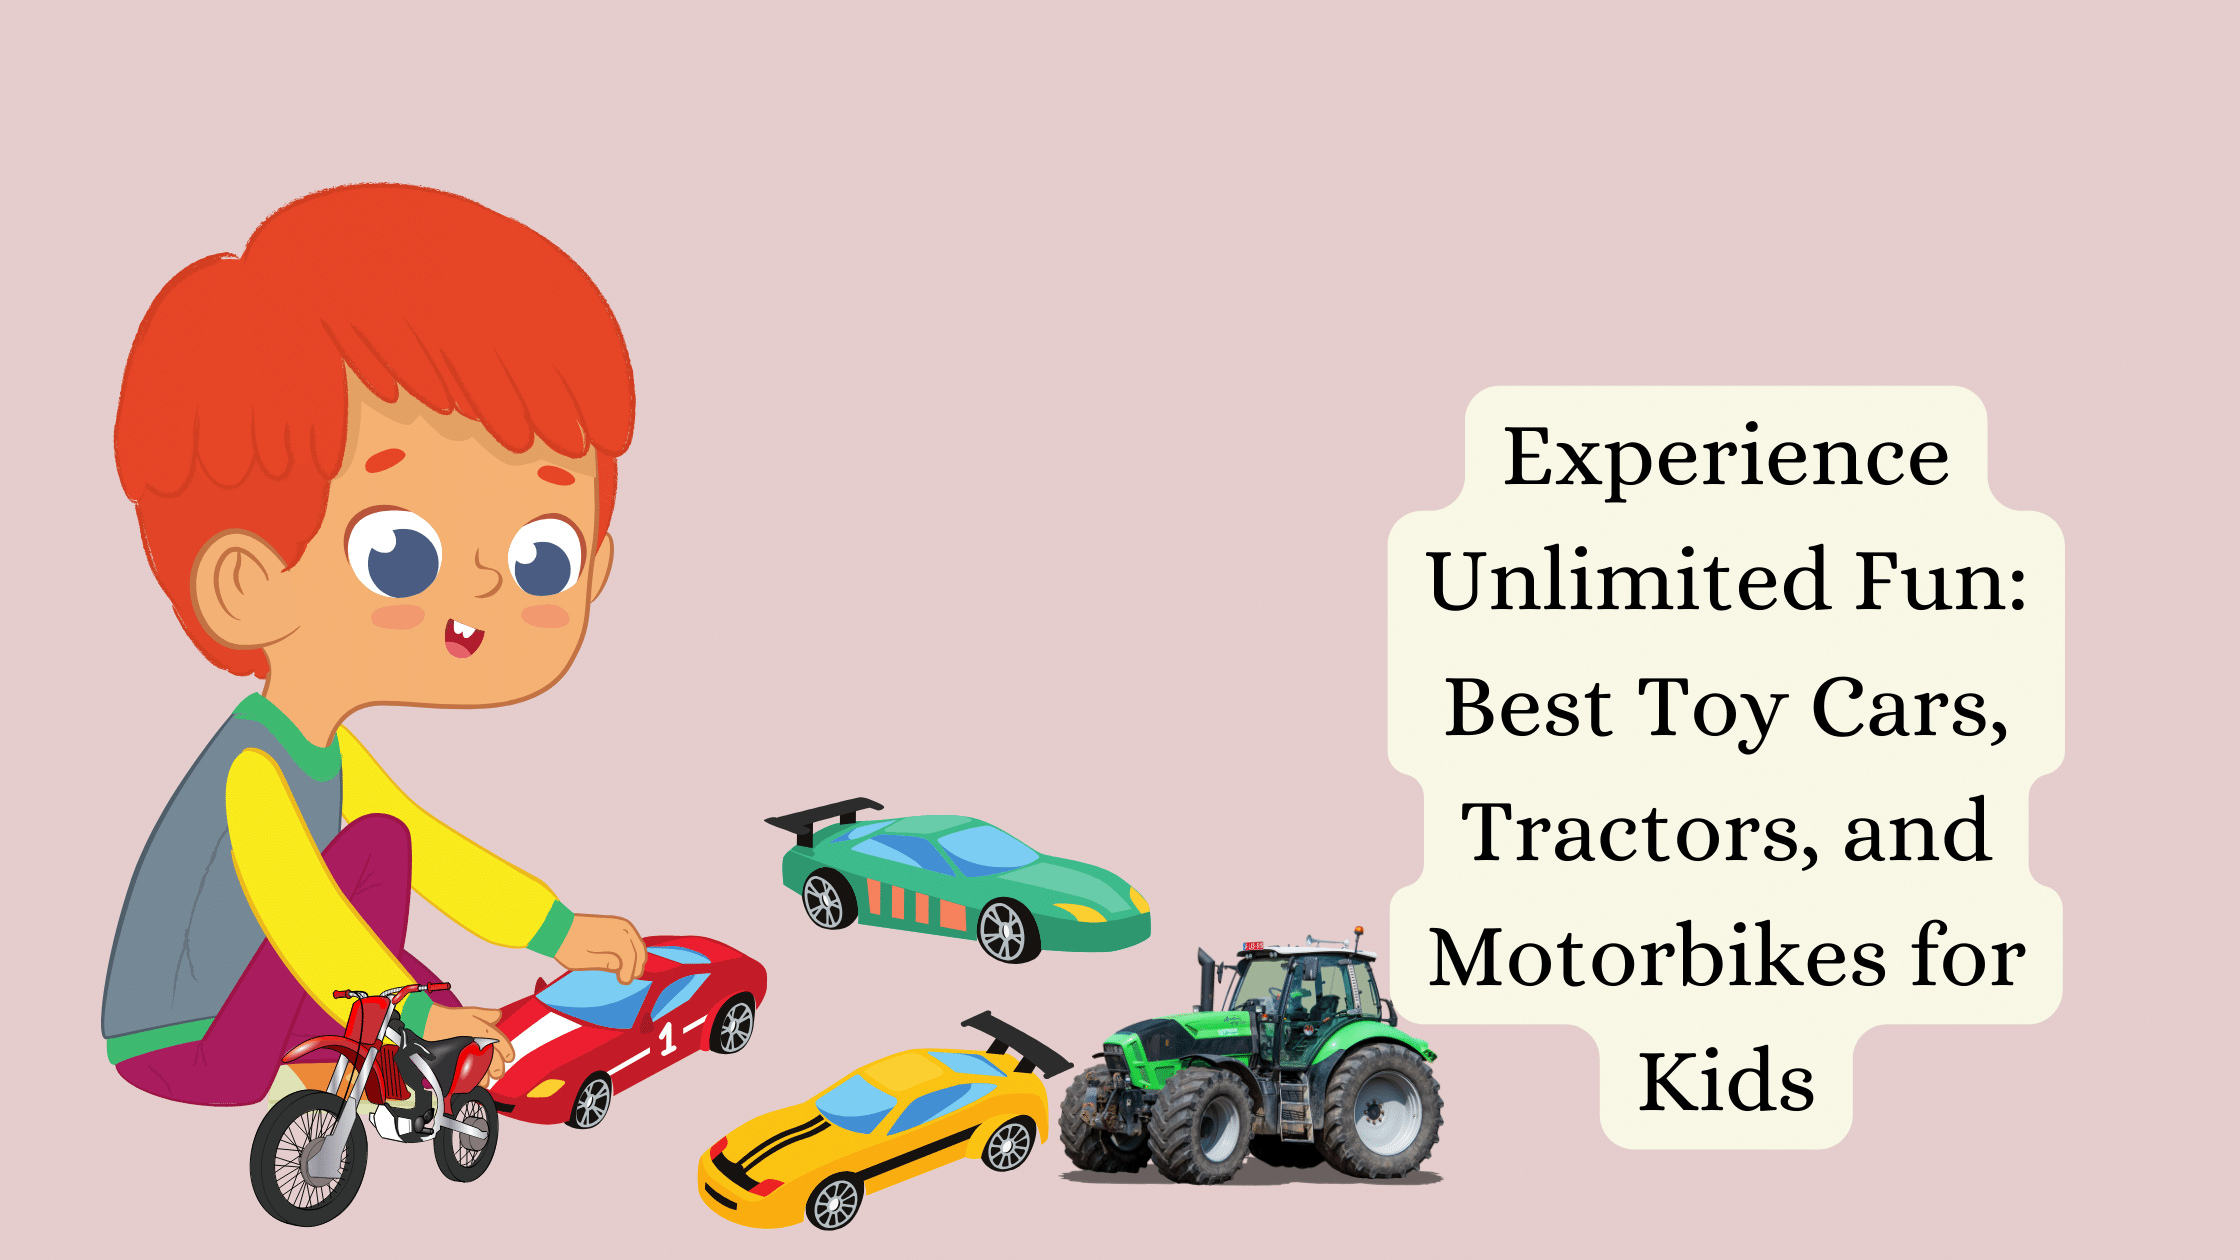 Best Toy Cars, Tractors, and Motorbikes for Kids